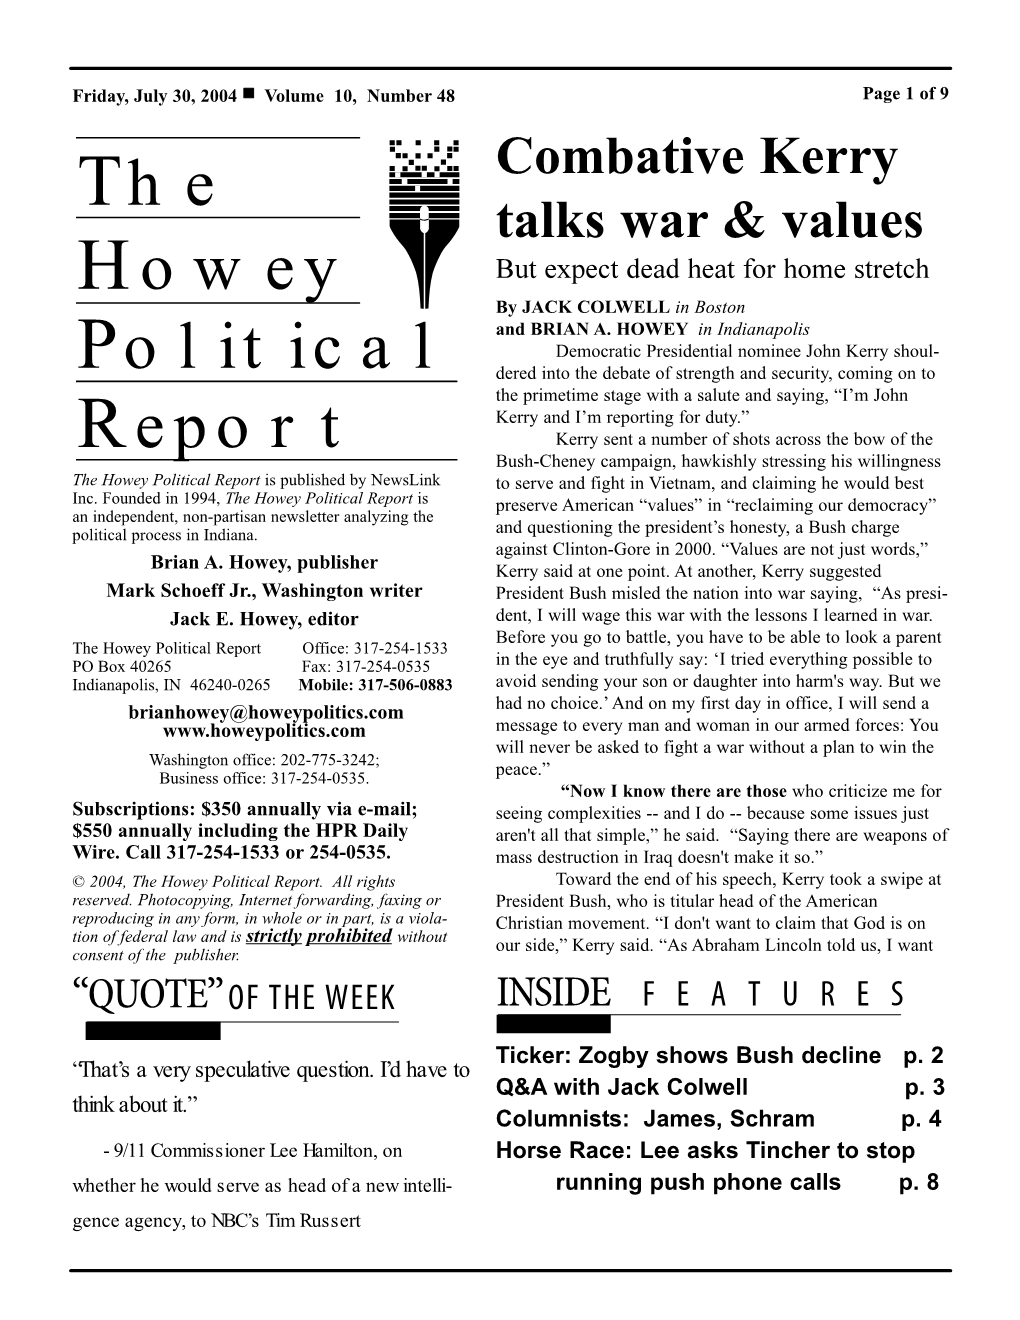 The Howey Political Report Is Published by Newslink to Serve and Fight in Vietnam, and Claiming He Would Best Inc